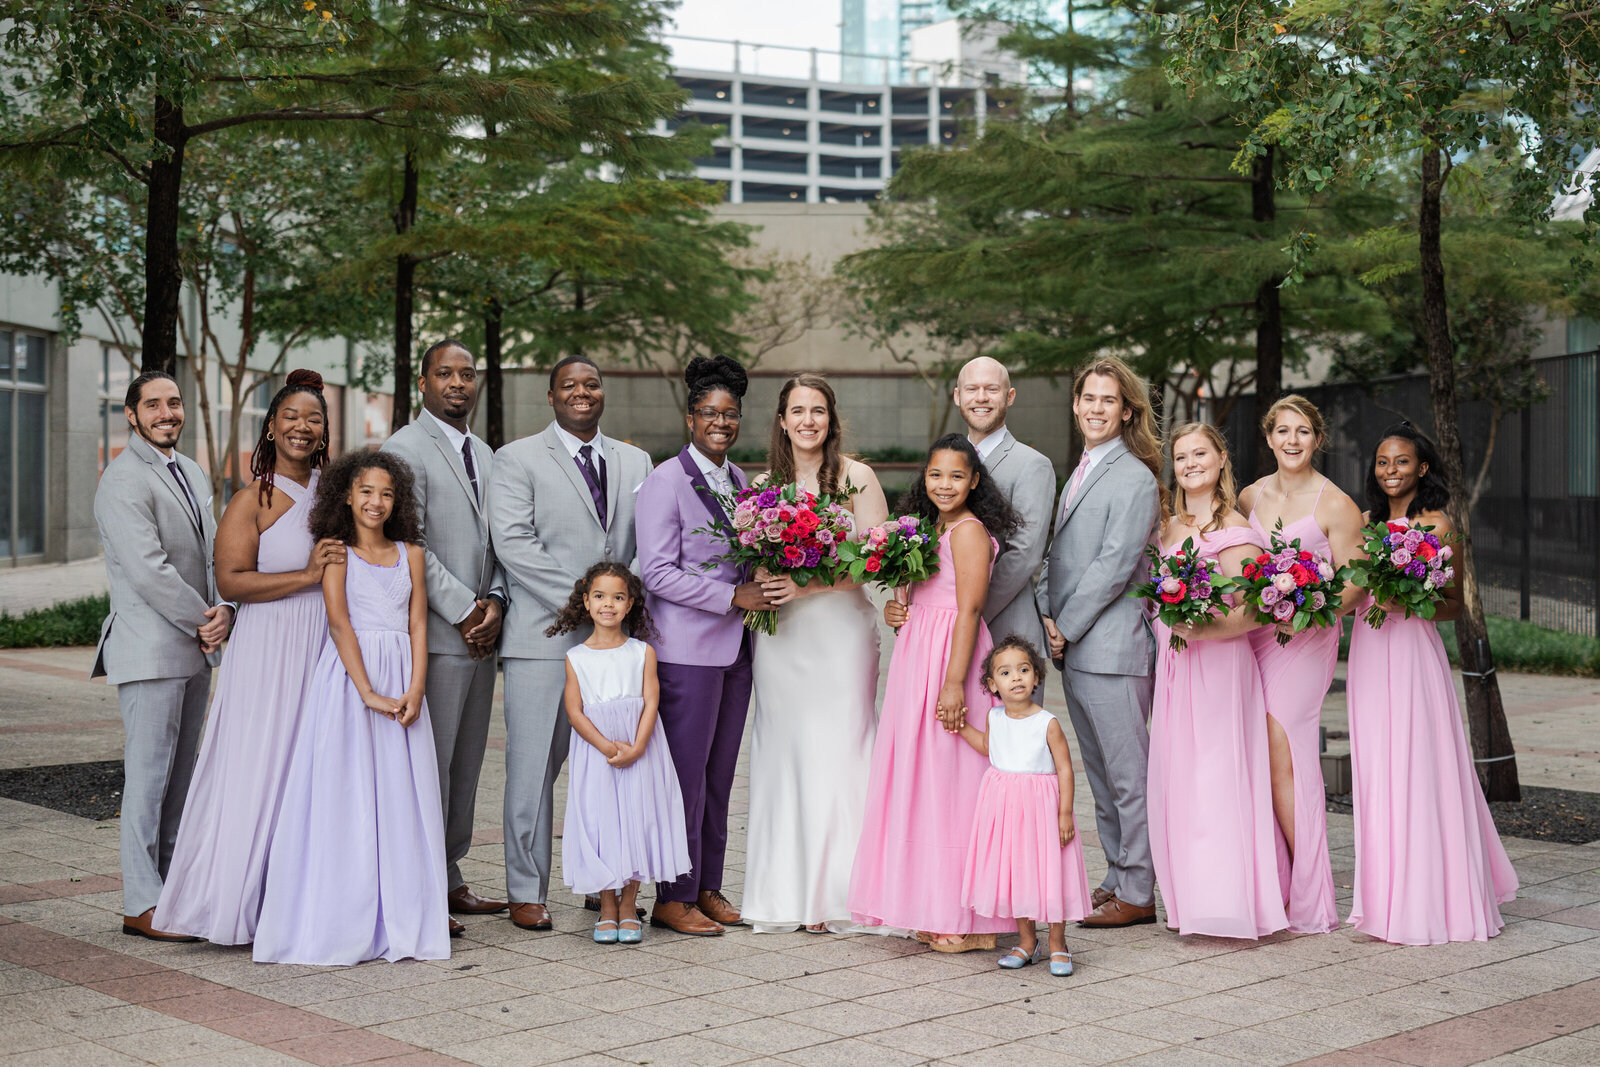 Formal photo of a wedding party and two brides at the Westin Hotel in Dallas, Texas. The women in the wedding party are all in purple and pink dresses and holding bouquets while the men in the bridal party are wearing grey suits pink or purple ties. The African American bride on the left is wearing a purple suit while the Caucasian bride on the right is wearing a white dress and holding a large bouquet.